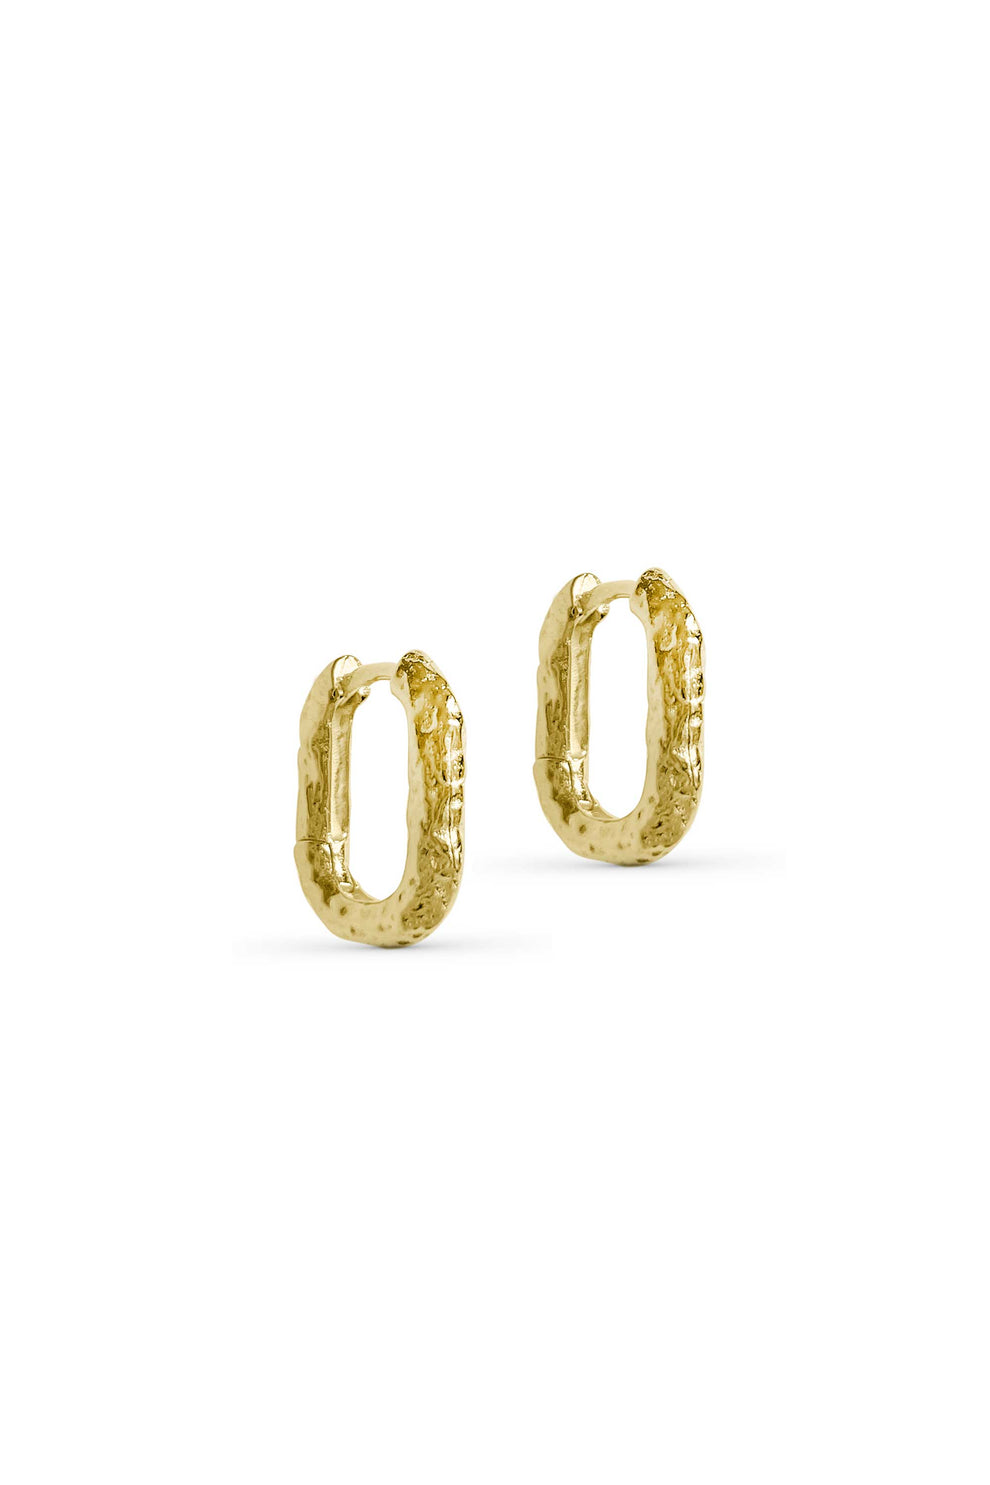 Bora Oval Hoops - Gold Plating